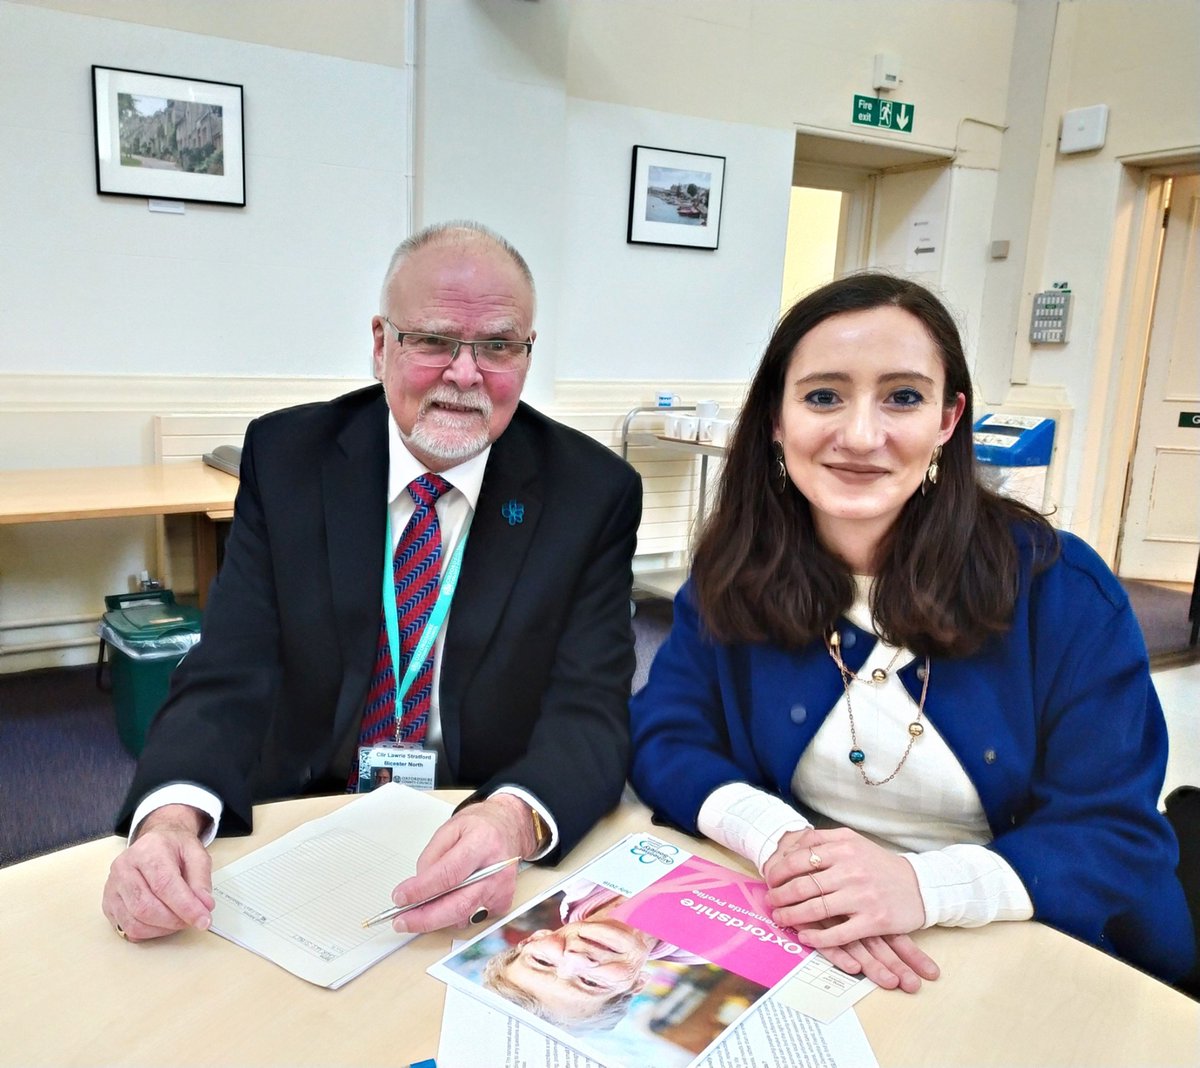 Thank you to both @ianhudspeth & Cllr Stratford for discussing how @OxfordshireCC can improve the lives of people with #dementia. It's amazing to see the council taking action to become more dementia friendly. We can #FixDementiaCare!